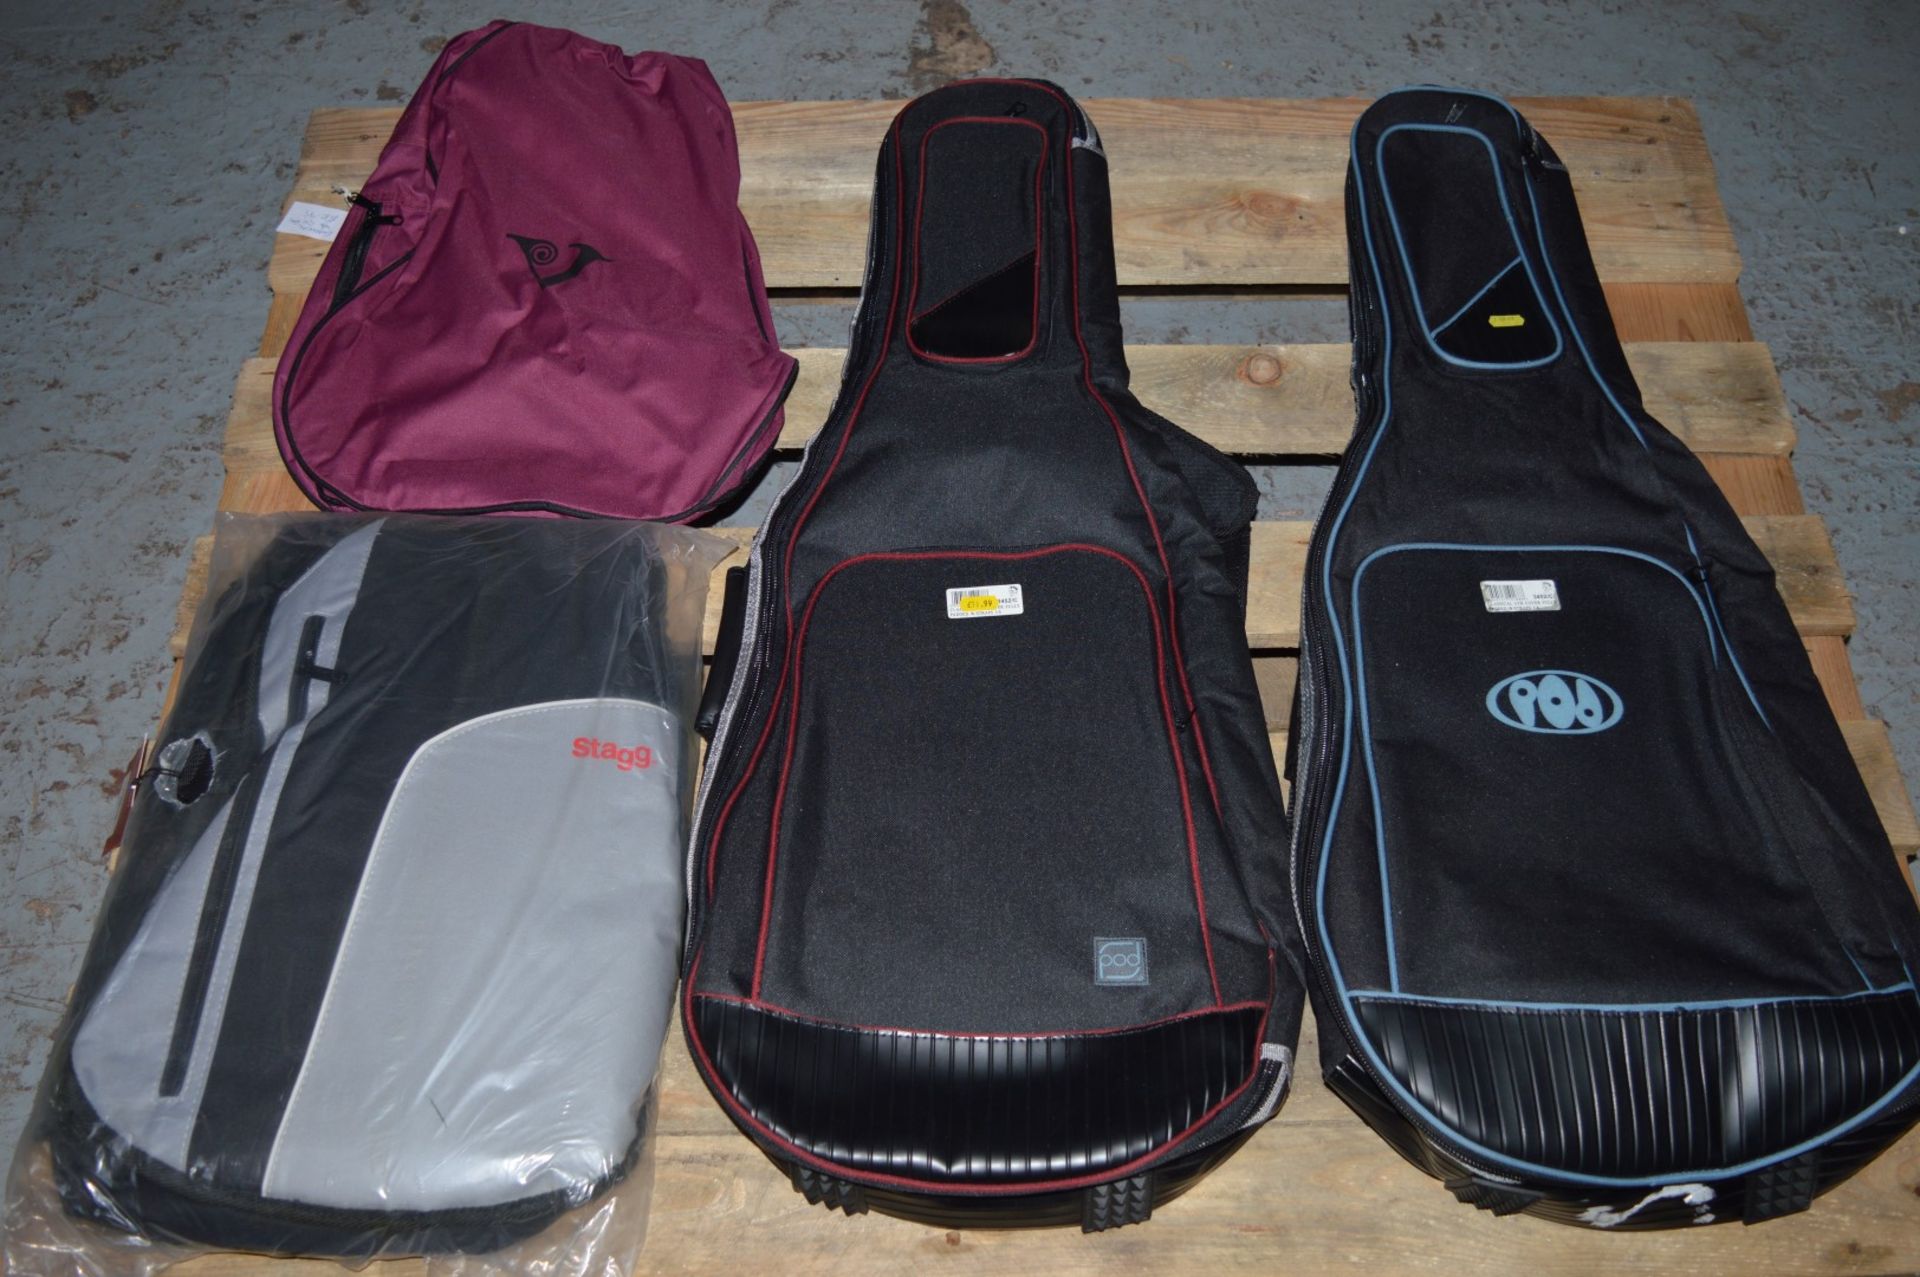 4 x Guitar Gig Bags - Suitable For Electric Guitars - Brands Include Pod and Stagg - Unused